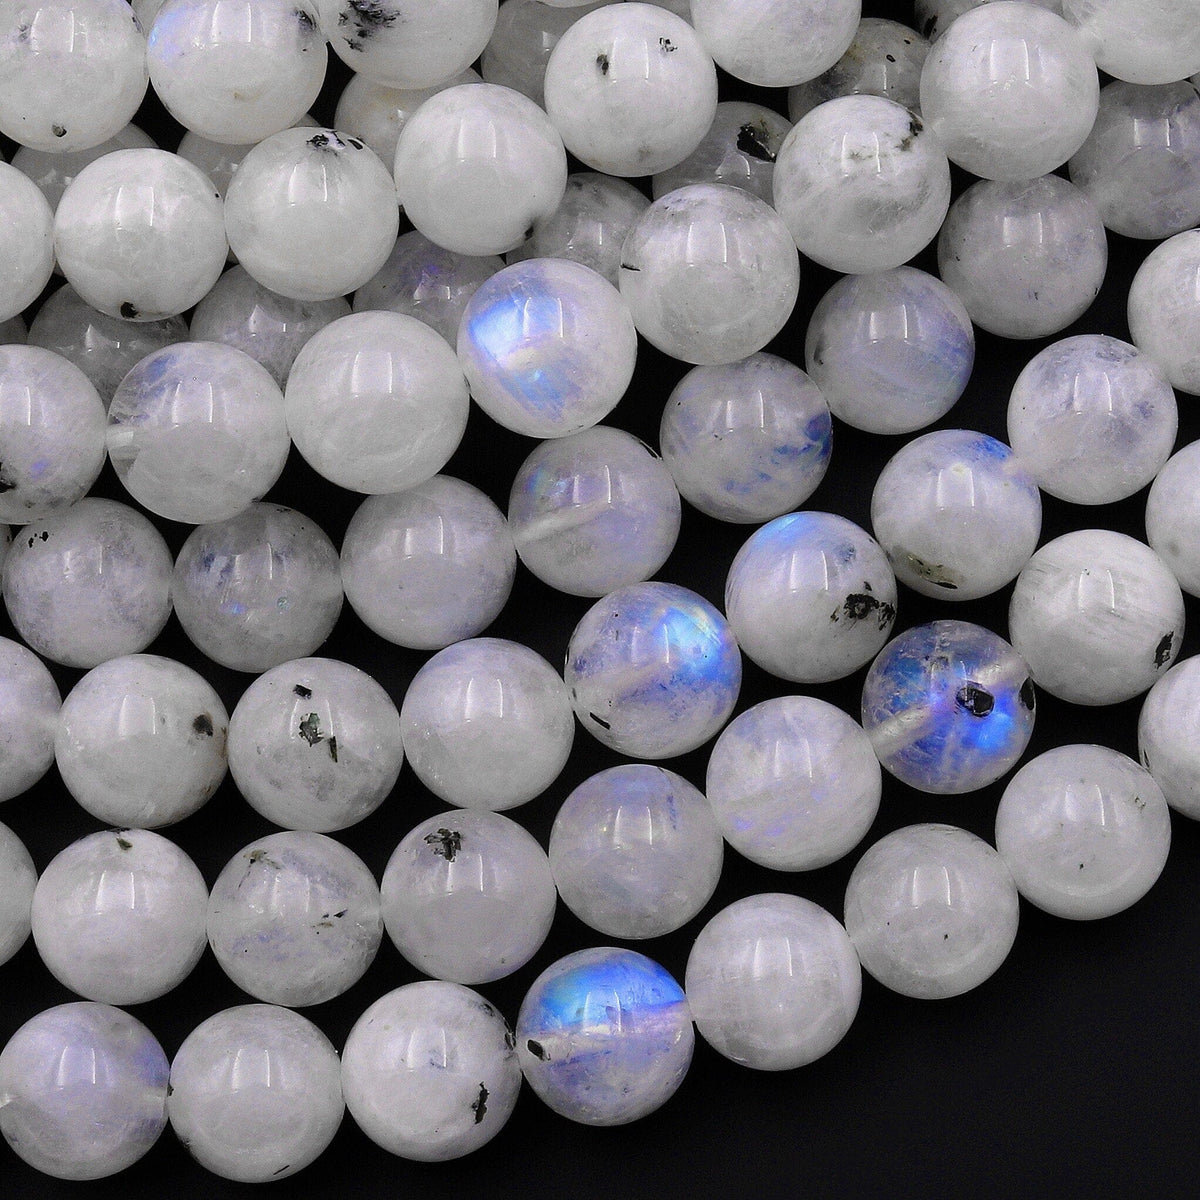 Natural Moonstone Beads 3mm 4mm 5mm 6mm 7mm 8mm Rainbow Moonstone Gemstone  Loose Beads 13full Strands AAA Quality Smooth Custmize Hole Size 